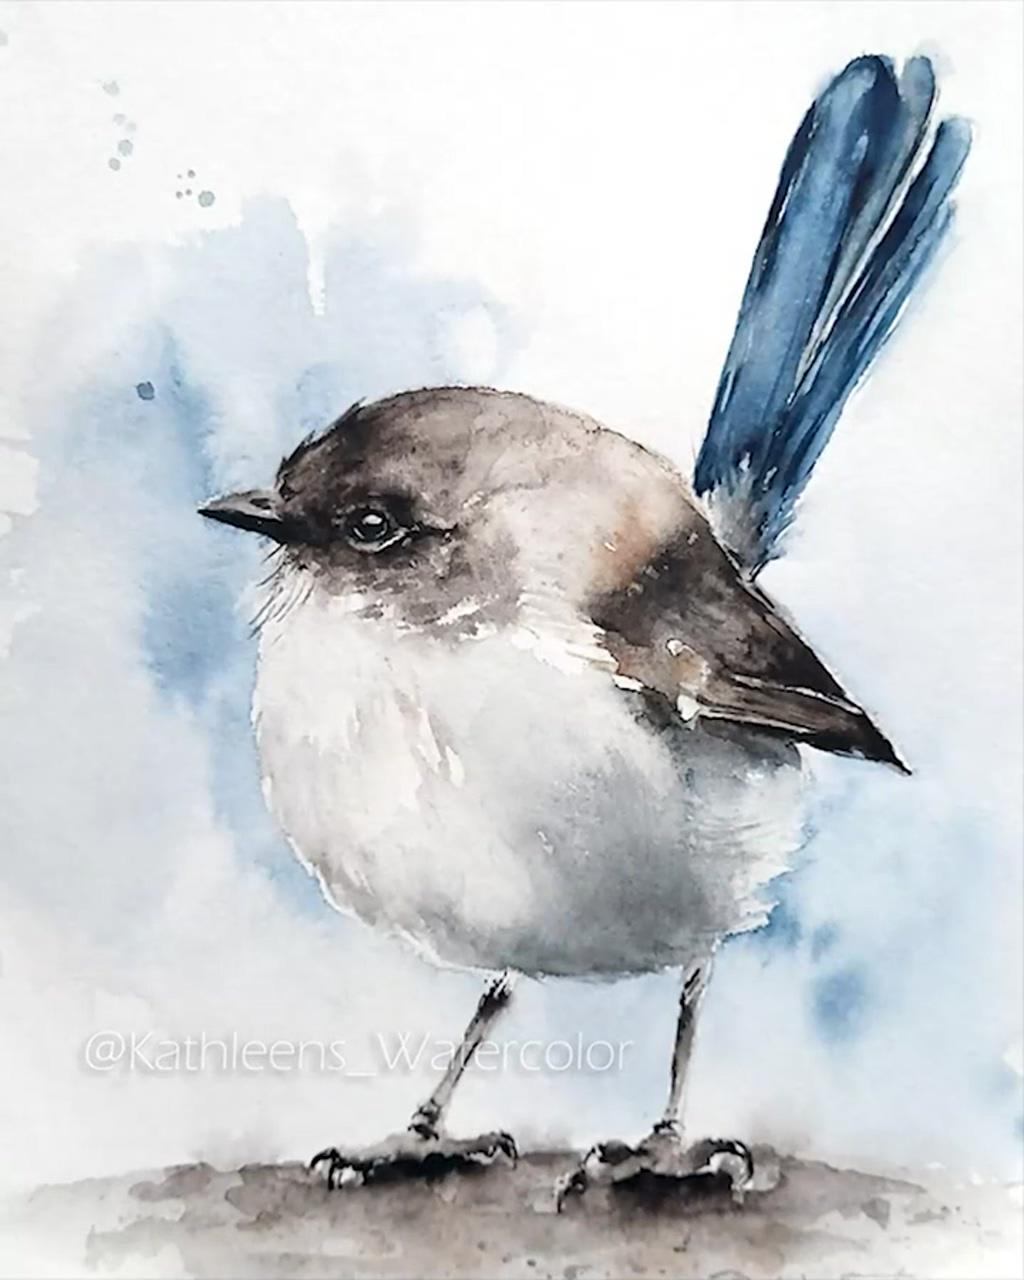 Watercolor tutorials step by step for beginner | bird watercolor tutorial step by step